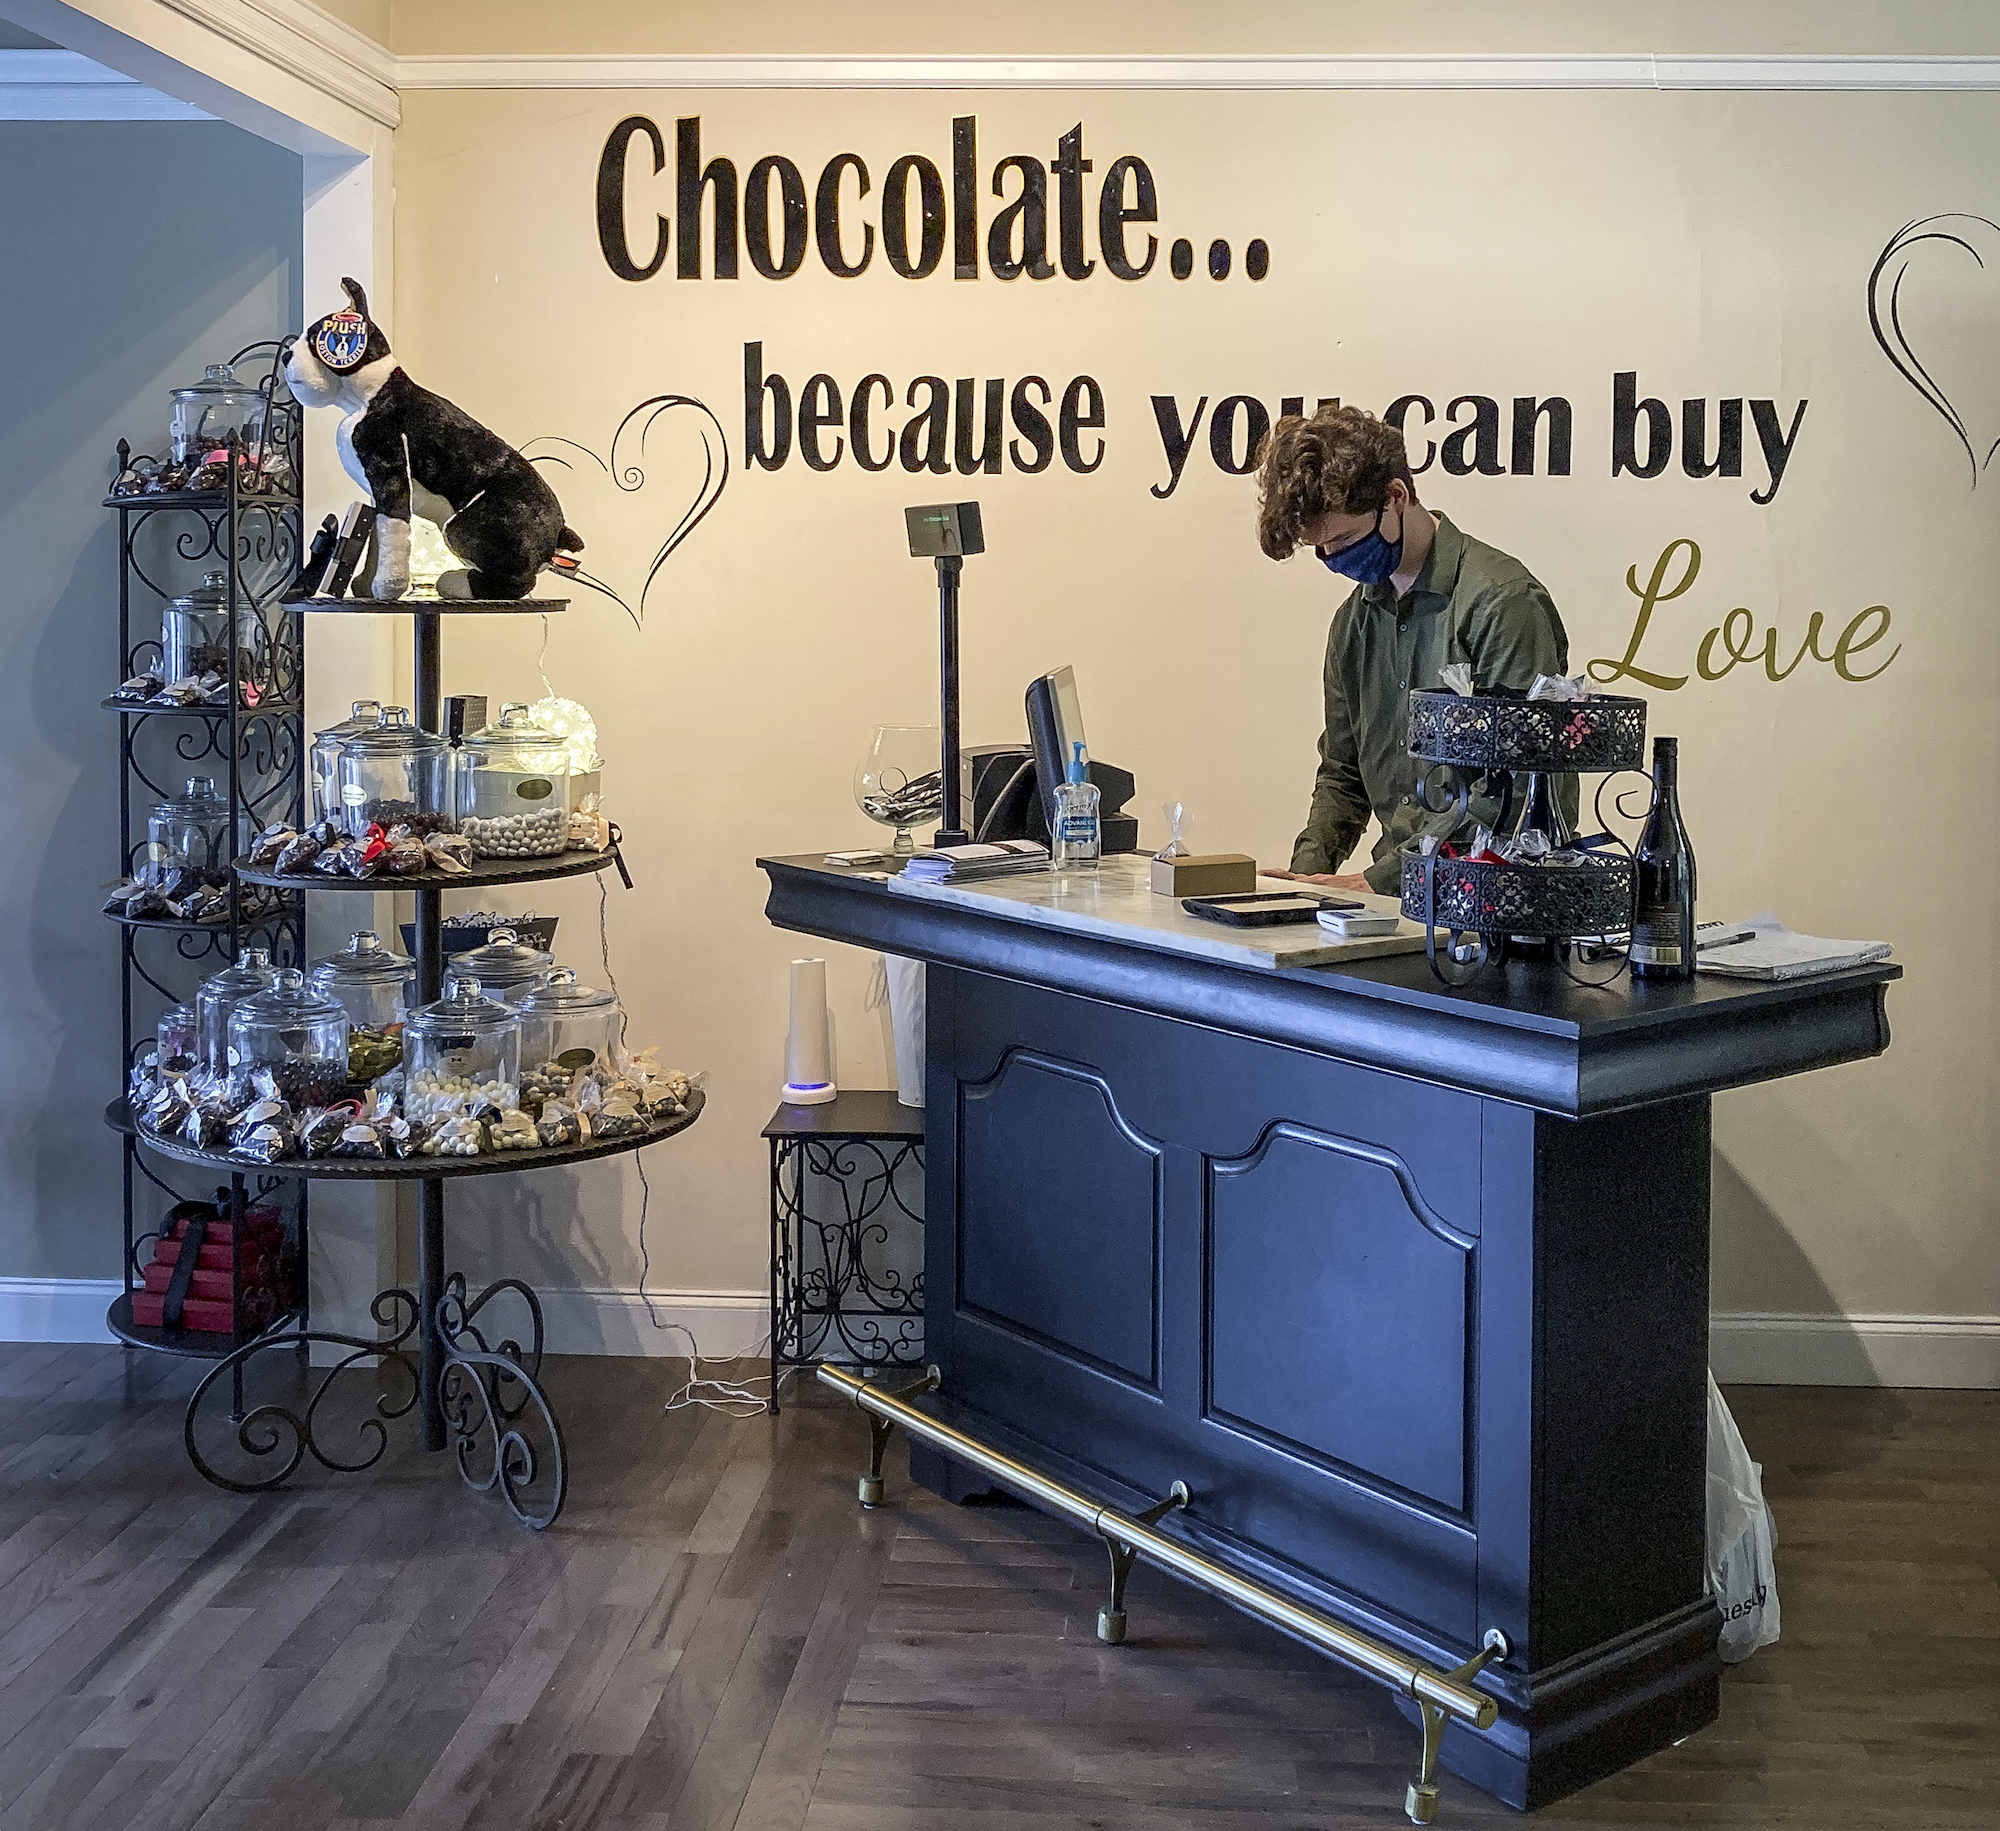 personalized service for selecting yummy, artistic, and awesome truffles